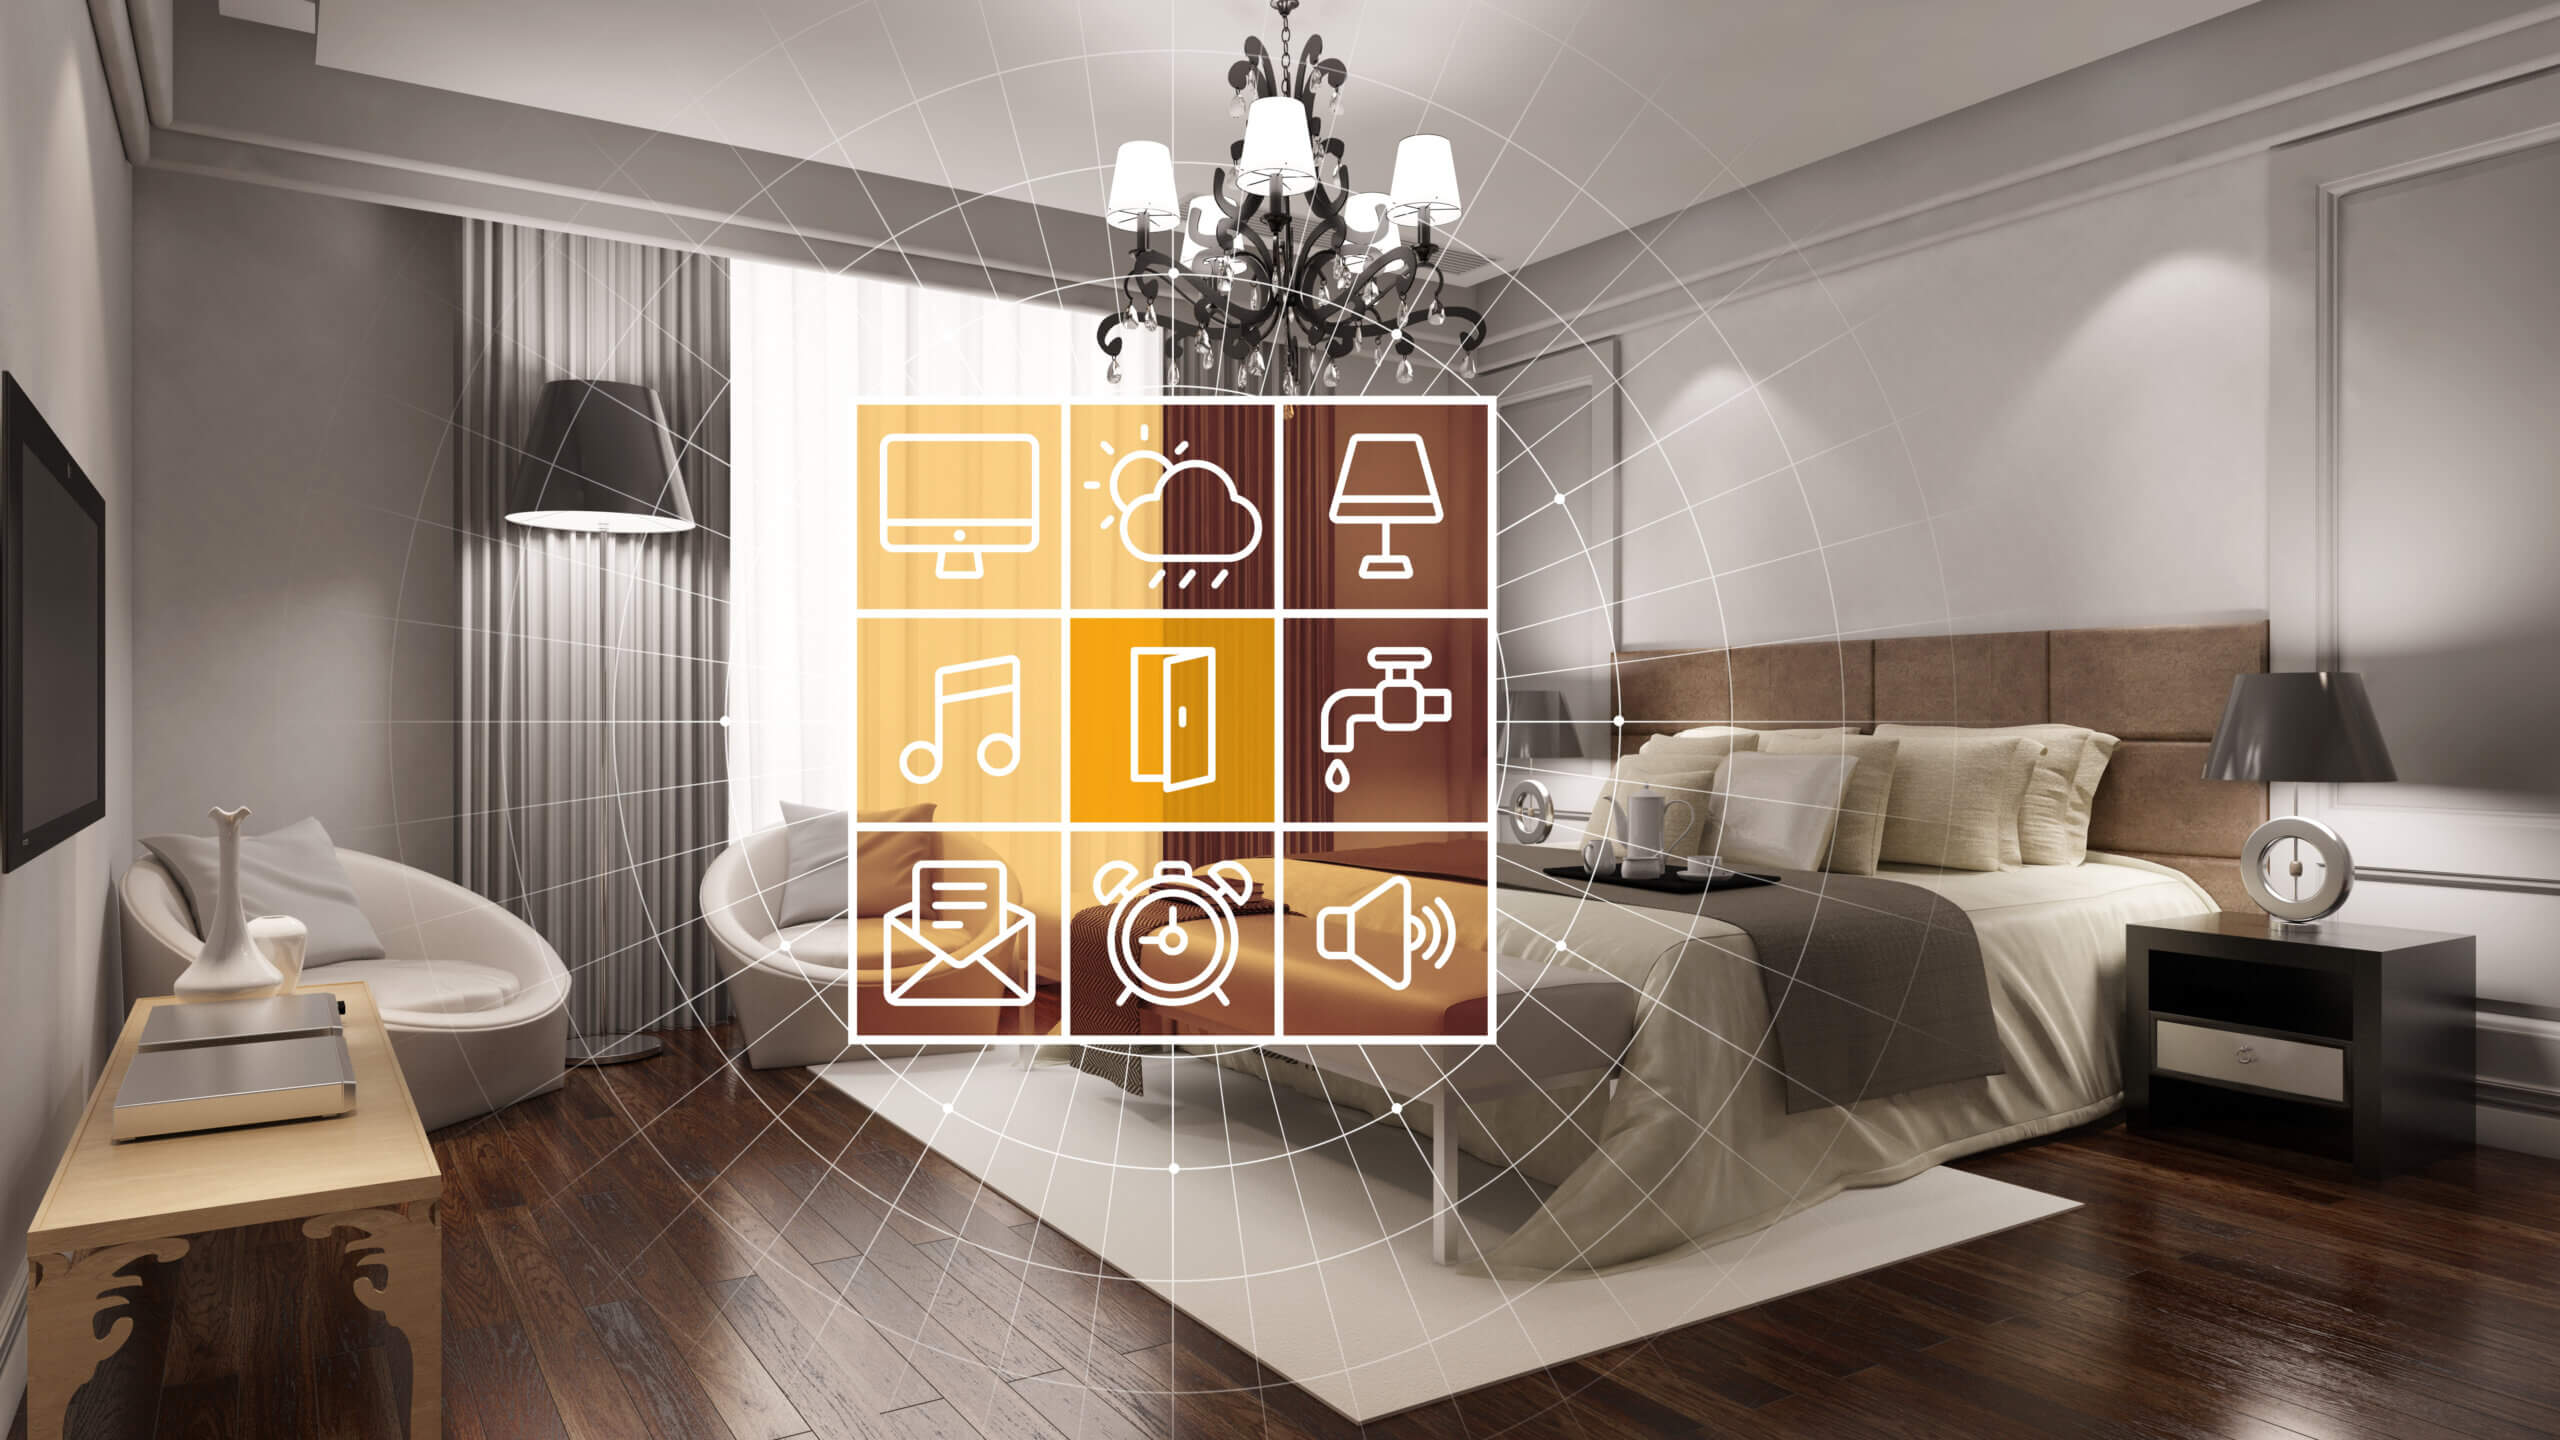 technology in hotel guest rooms